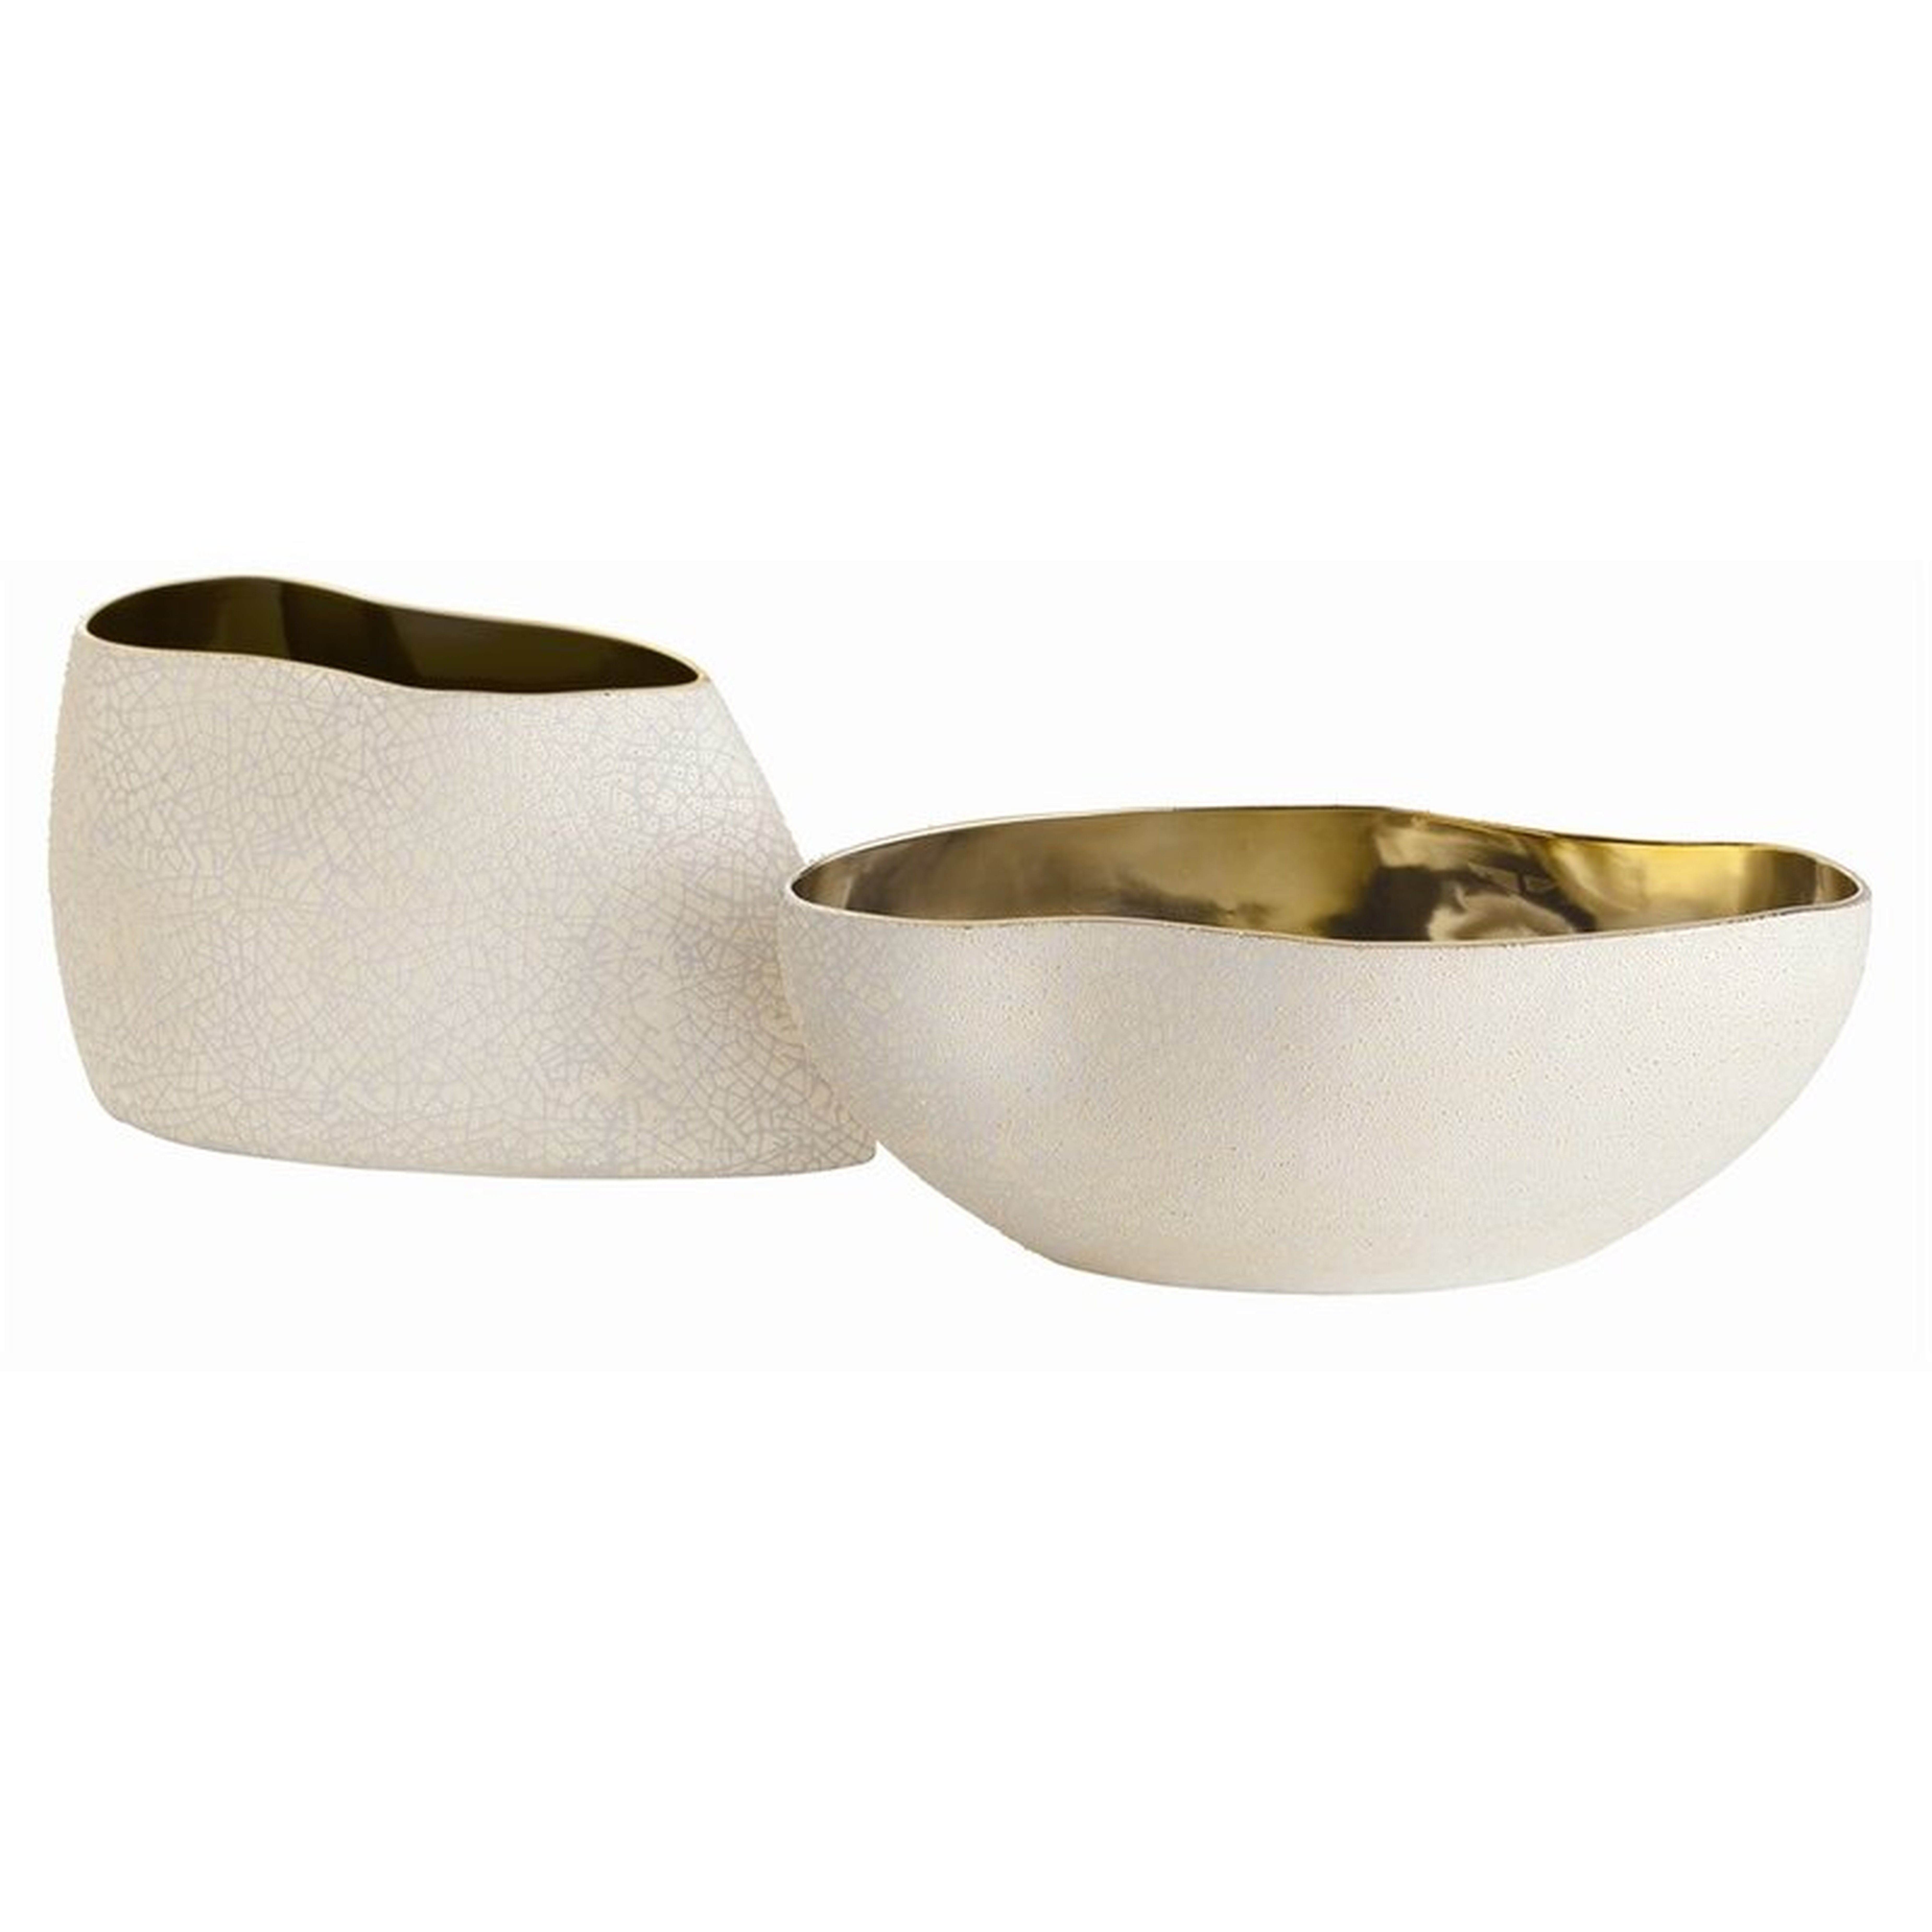 2 Piece Porcelain Abstract Decorative Bowl Set in Ivory/Black/Gold - Perigold